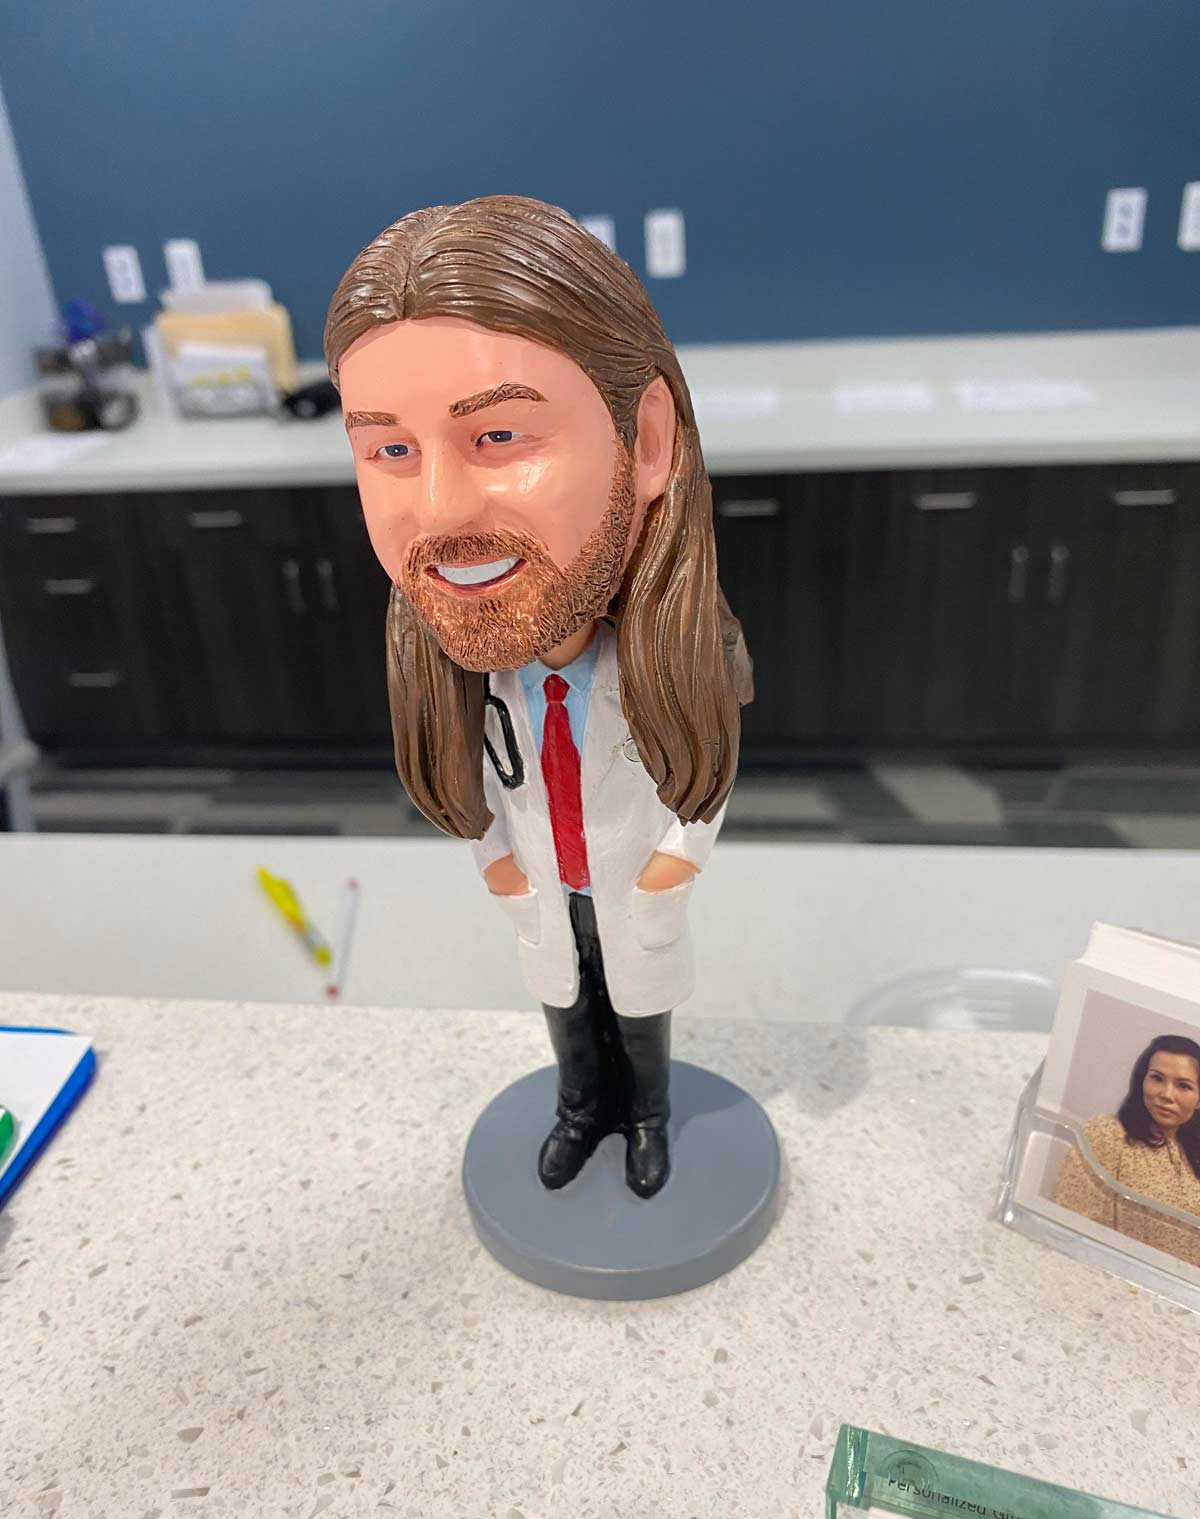 My primary doctor has a bobblehead of himself at the front desk